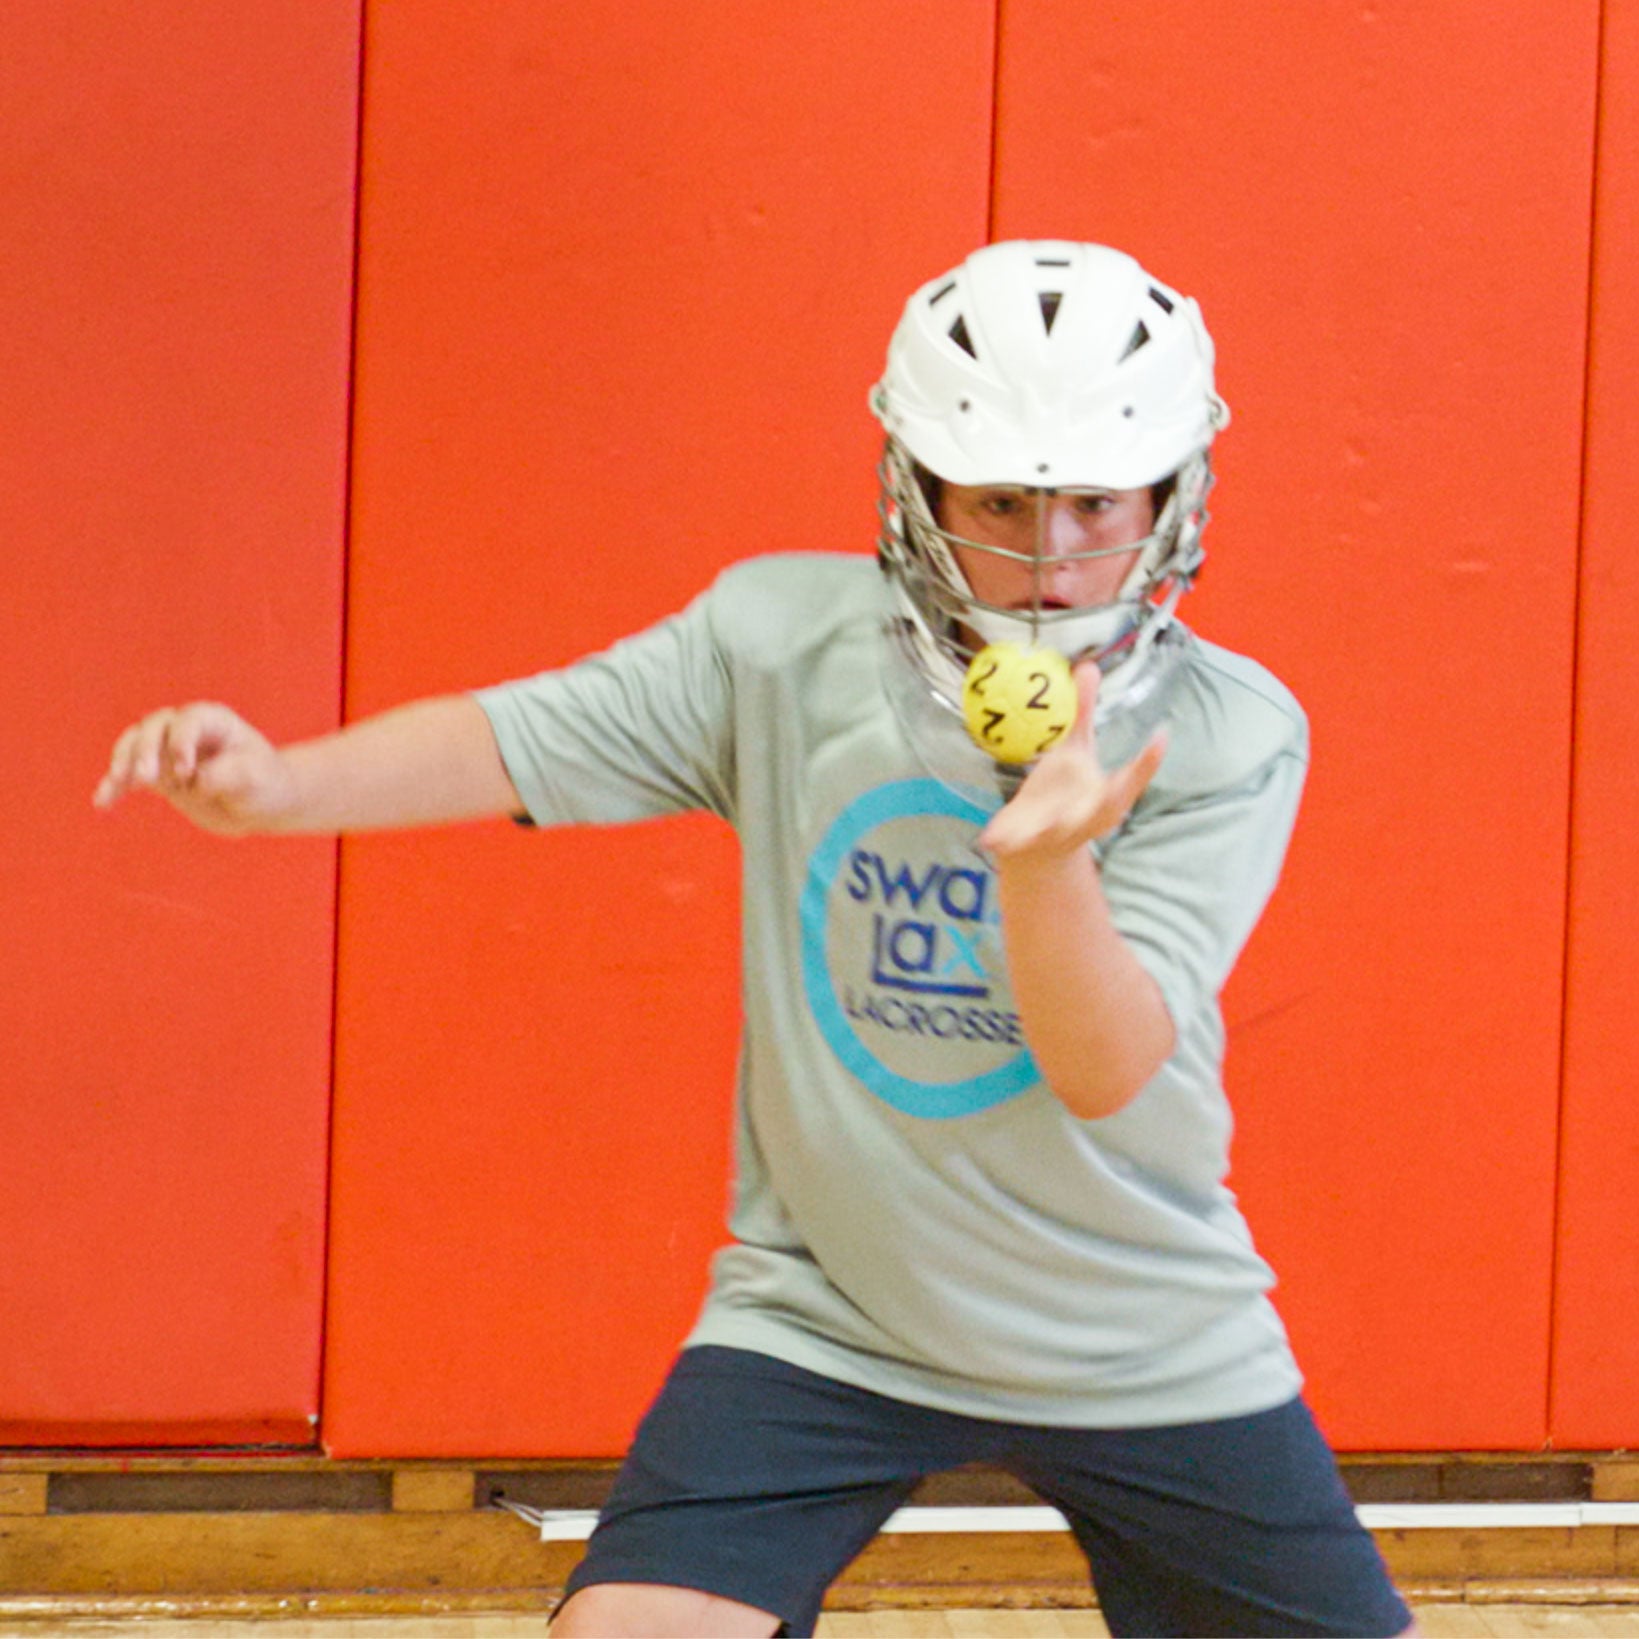 Lacrosse goalie with laser focus catching a Swax Lax goalie ball